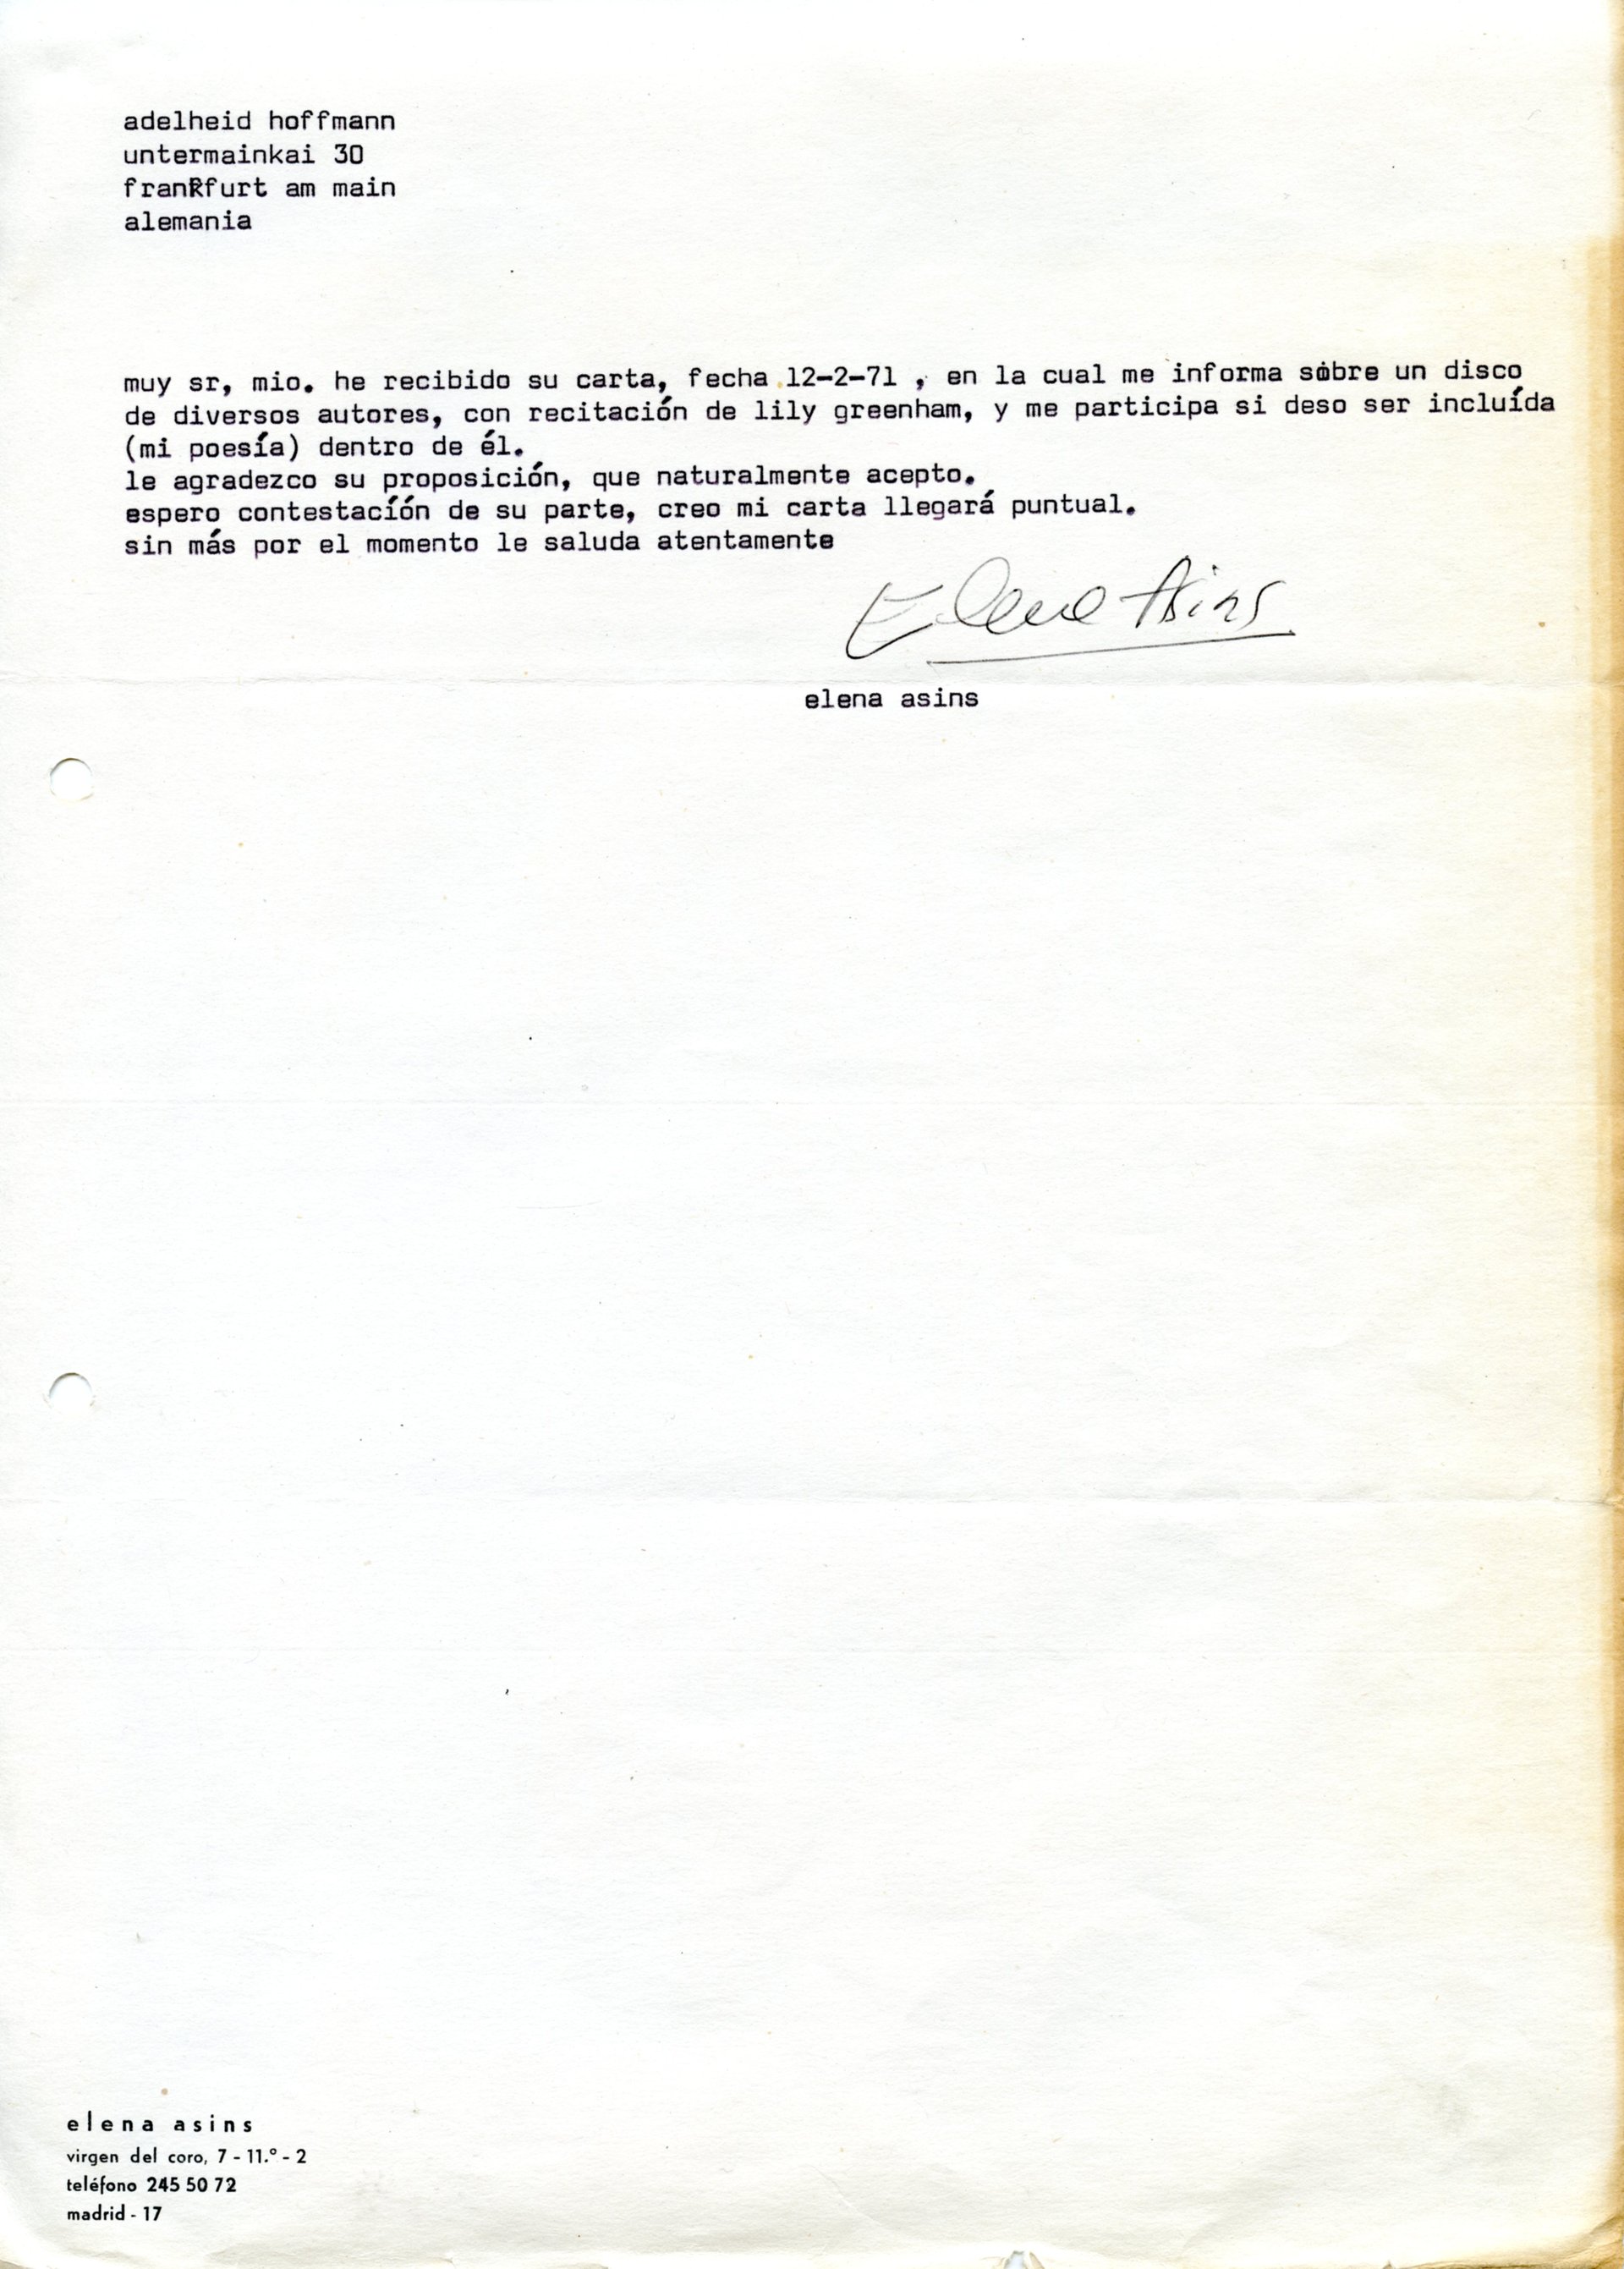 elena asisns&#x27;s permission to use her writing for &quot;internationale sprachexperimmente...&quot;